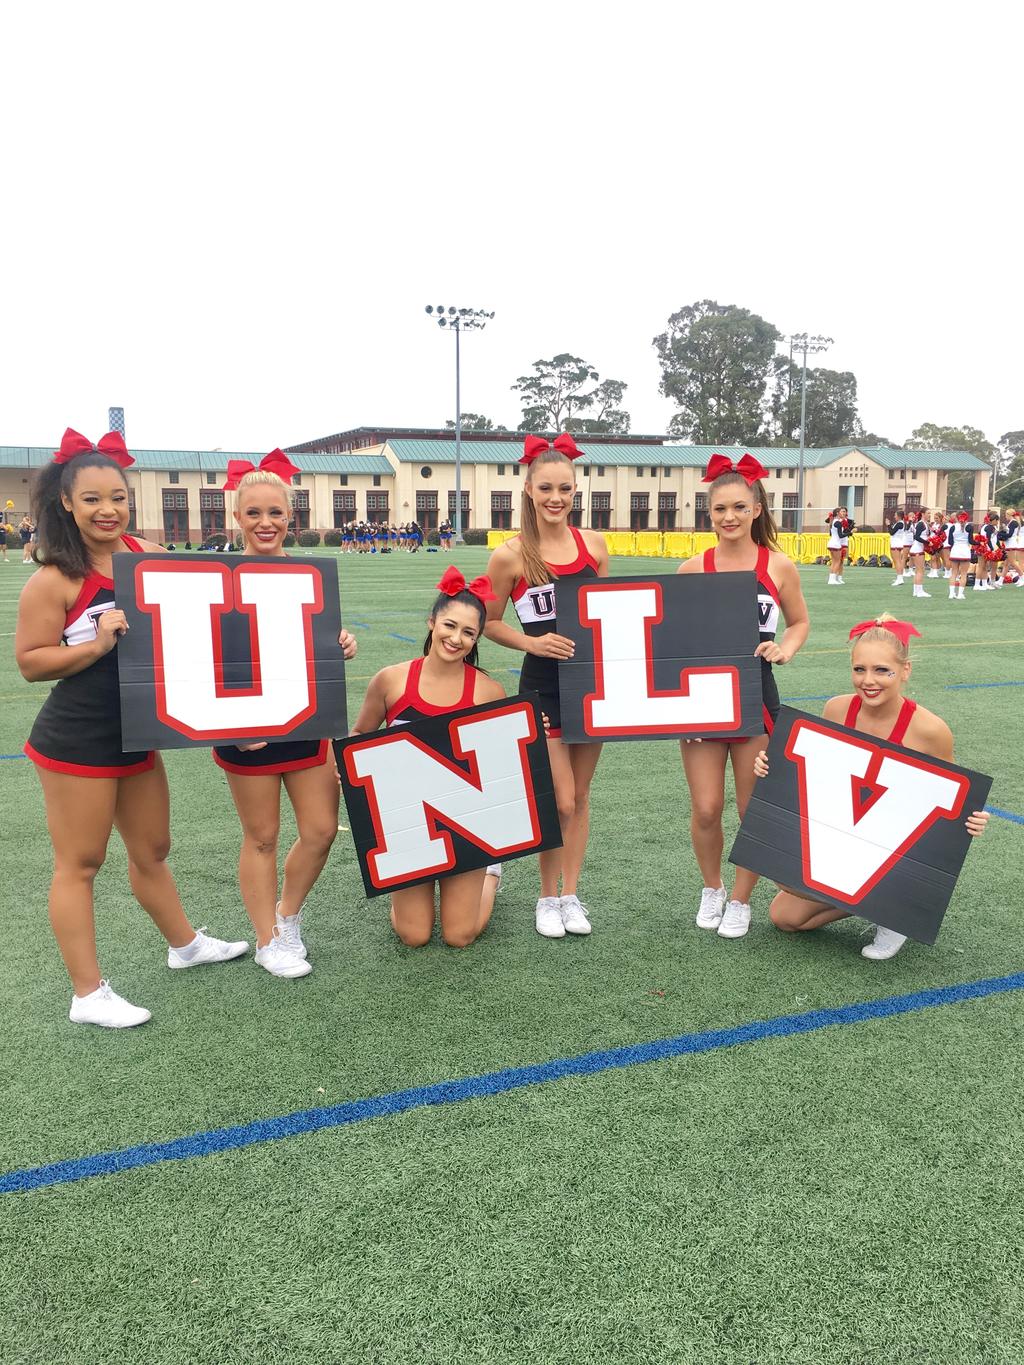 Frequently Asked Questions Are there any clinics/mock tryouts prior to the audition? Yes. Visit unlvcheer.com for details. Do you offer any scholarships?